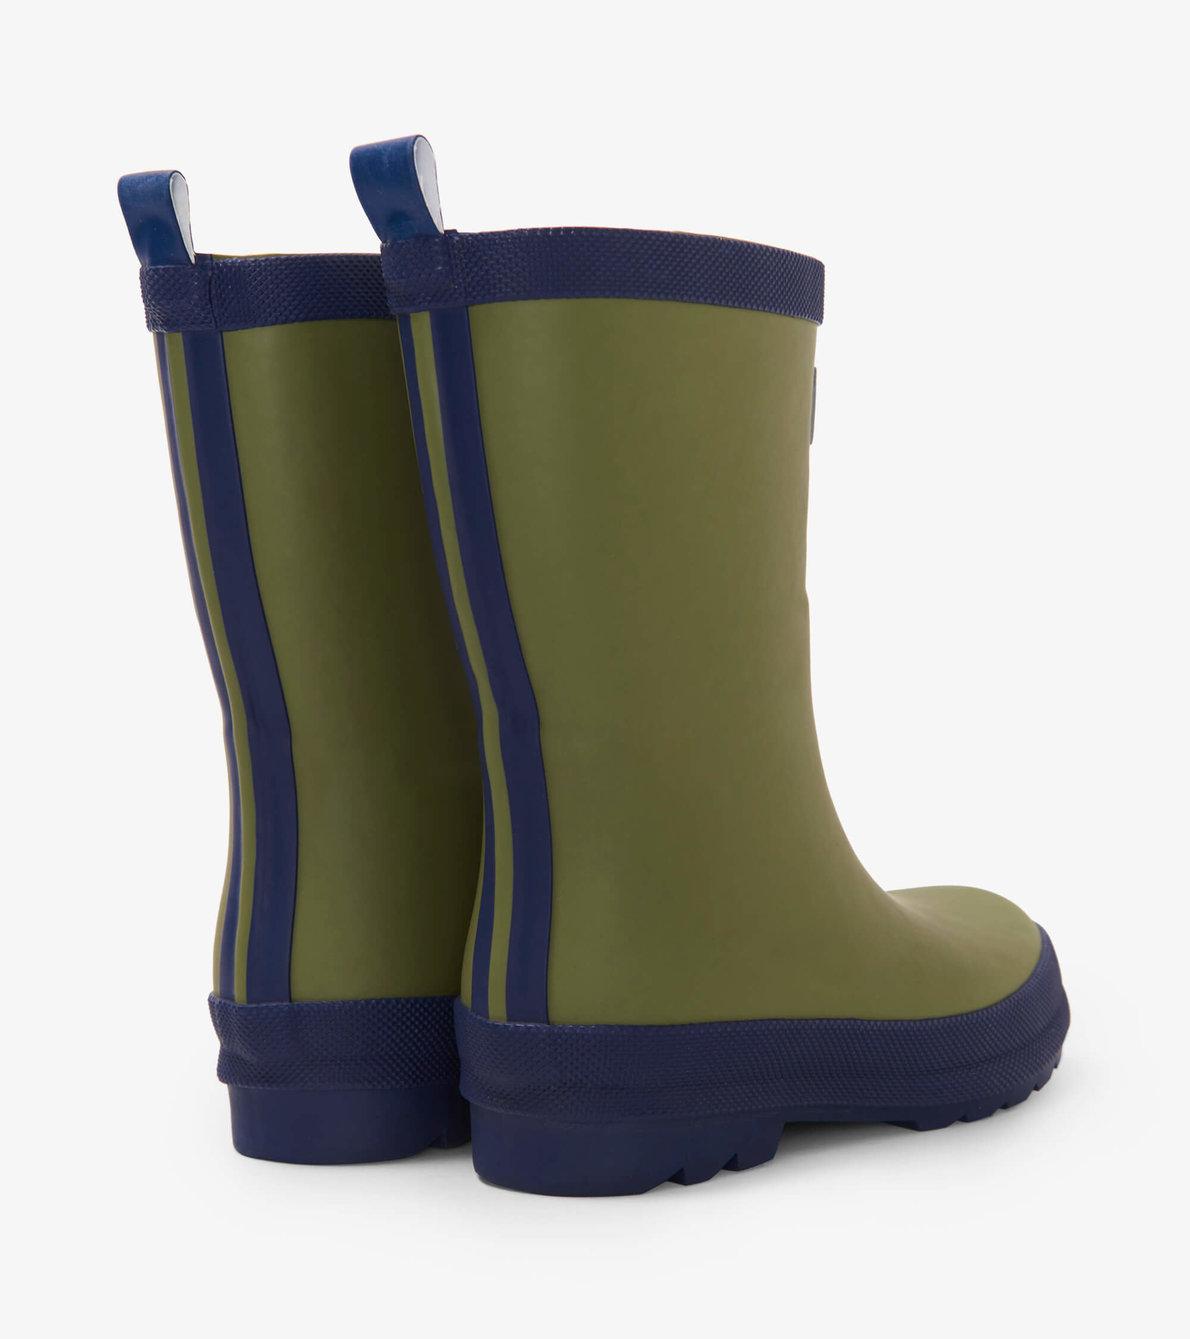 View larger image of Kids Forest Green Matte Rain Boots